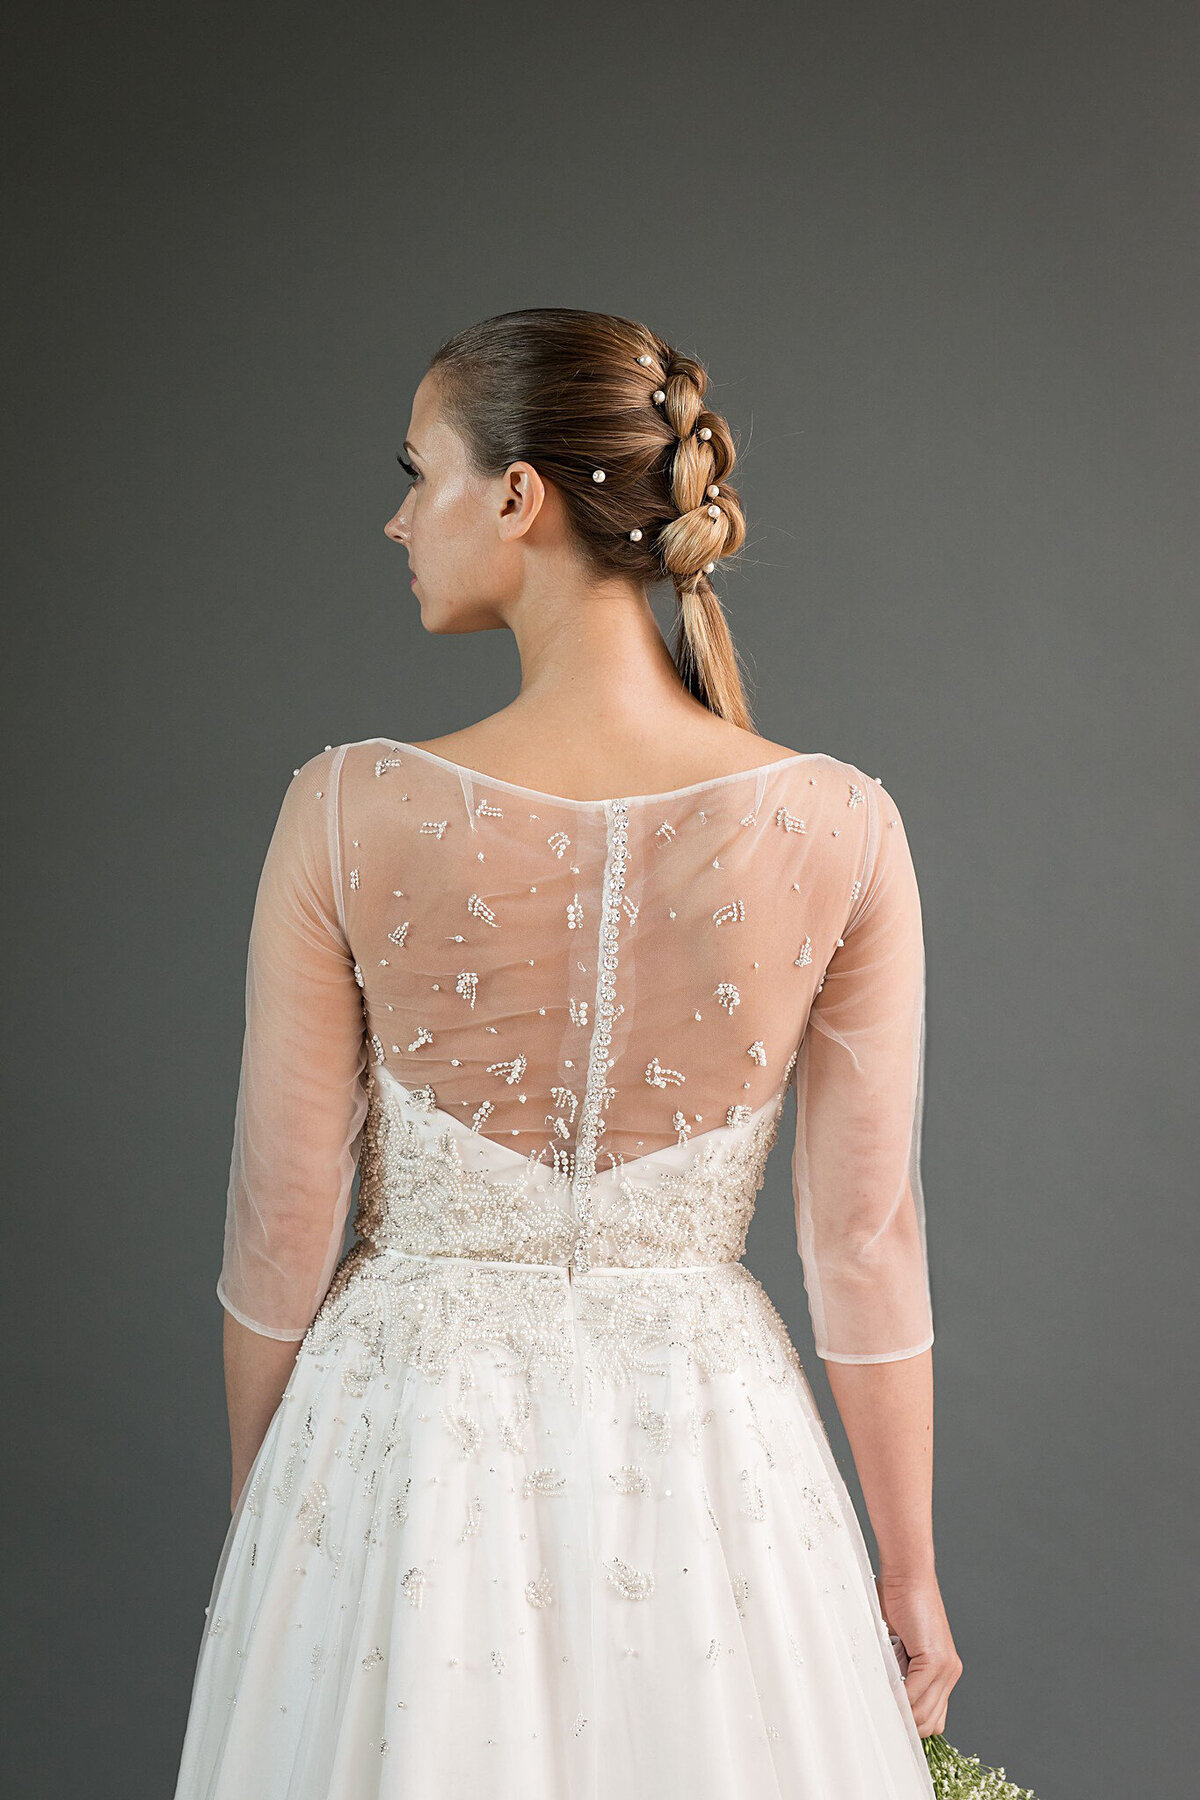 The strapless foundation of the Kei wedding dress style can be seen through the illusion back bodice. The illusion bodice itself features a crystal button closure down the back to the waistline.